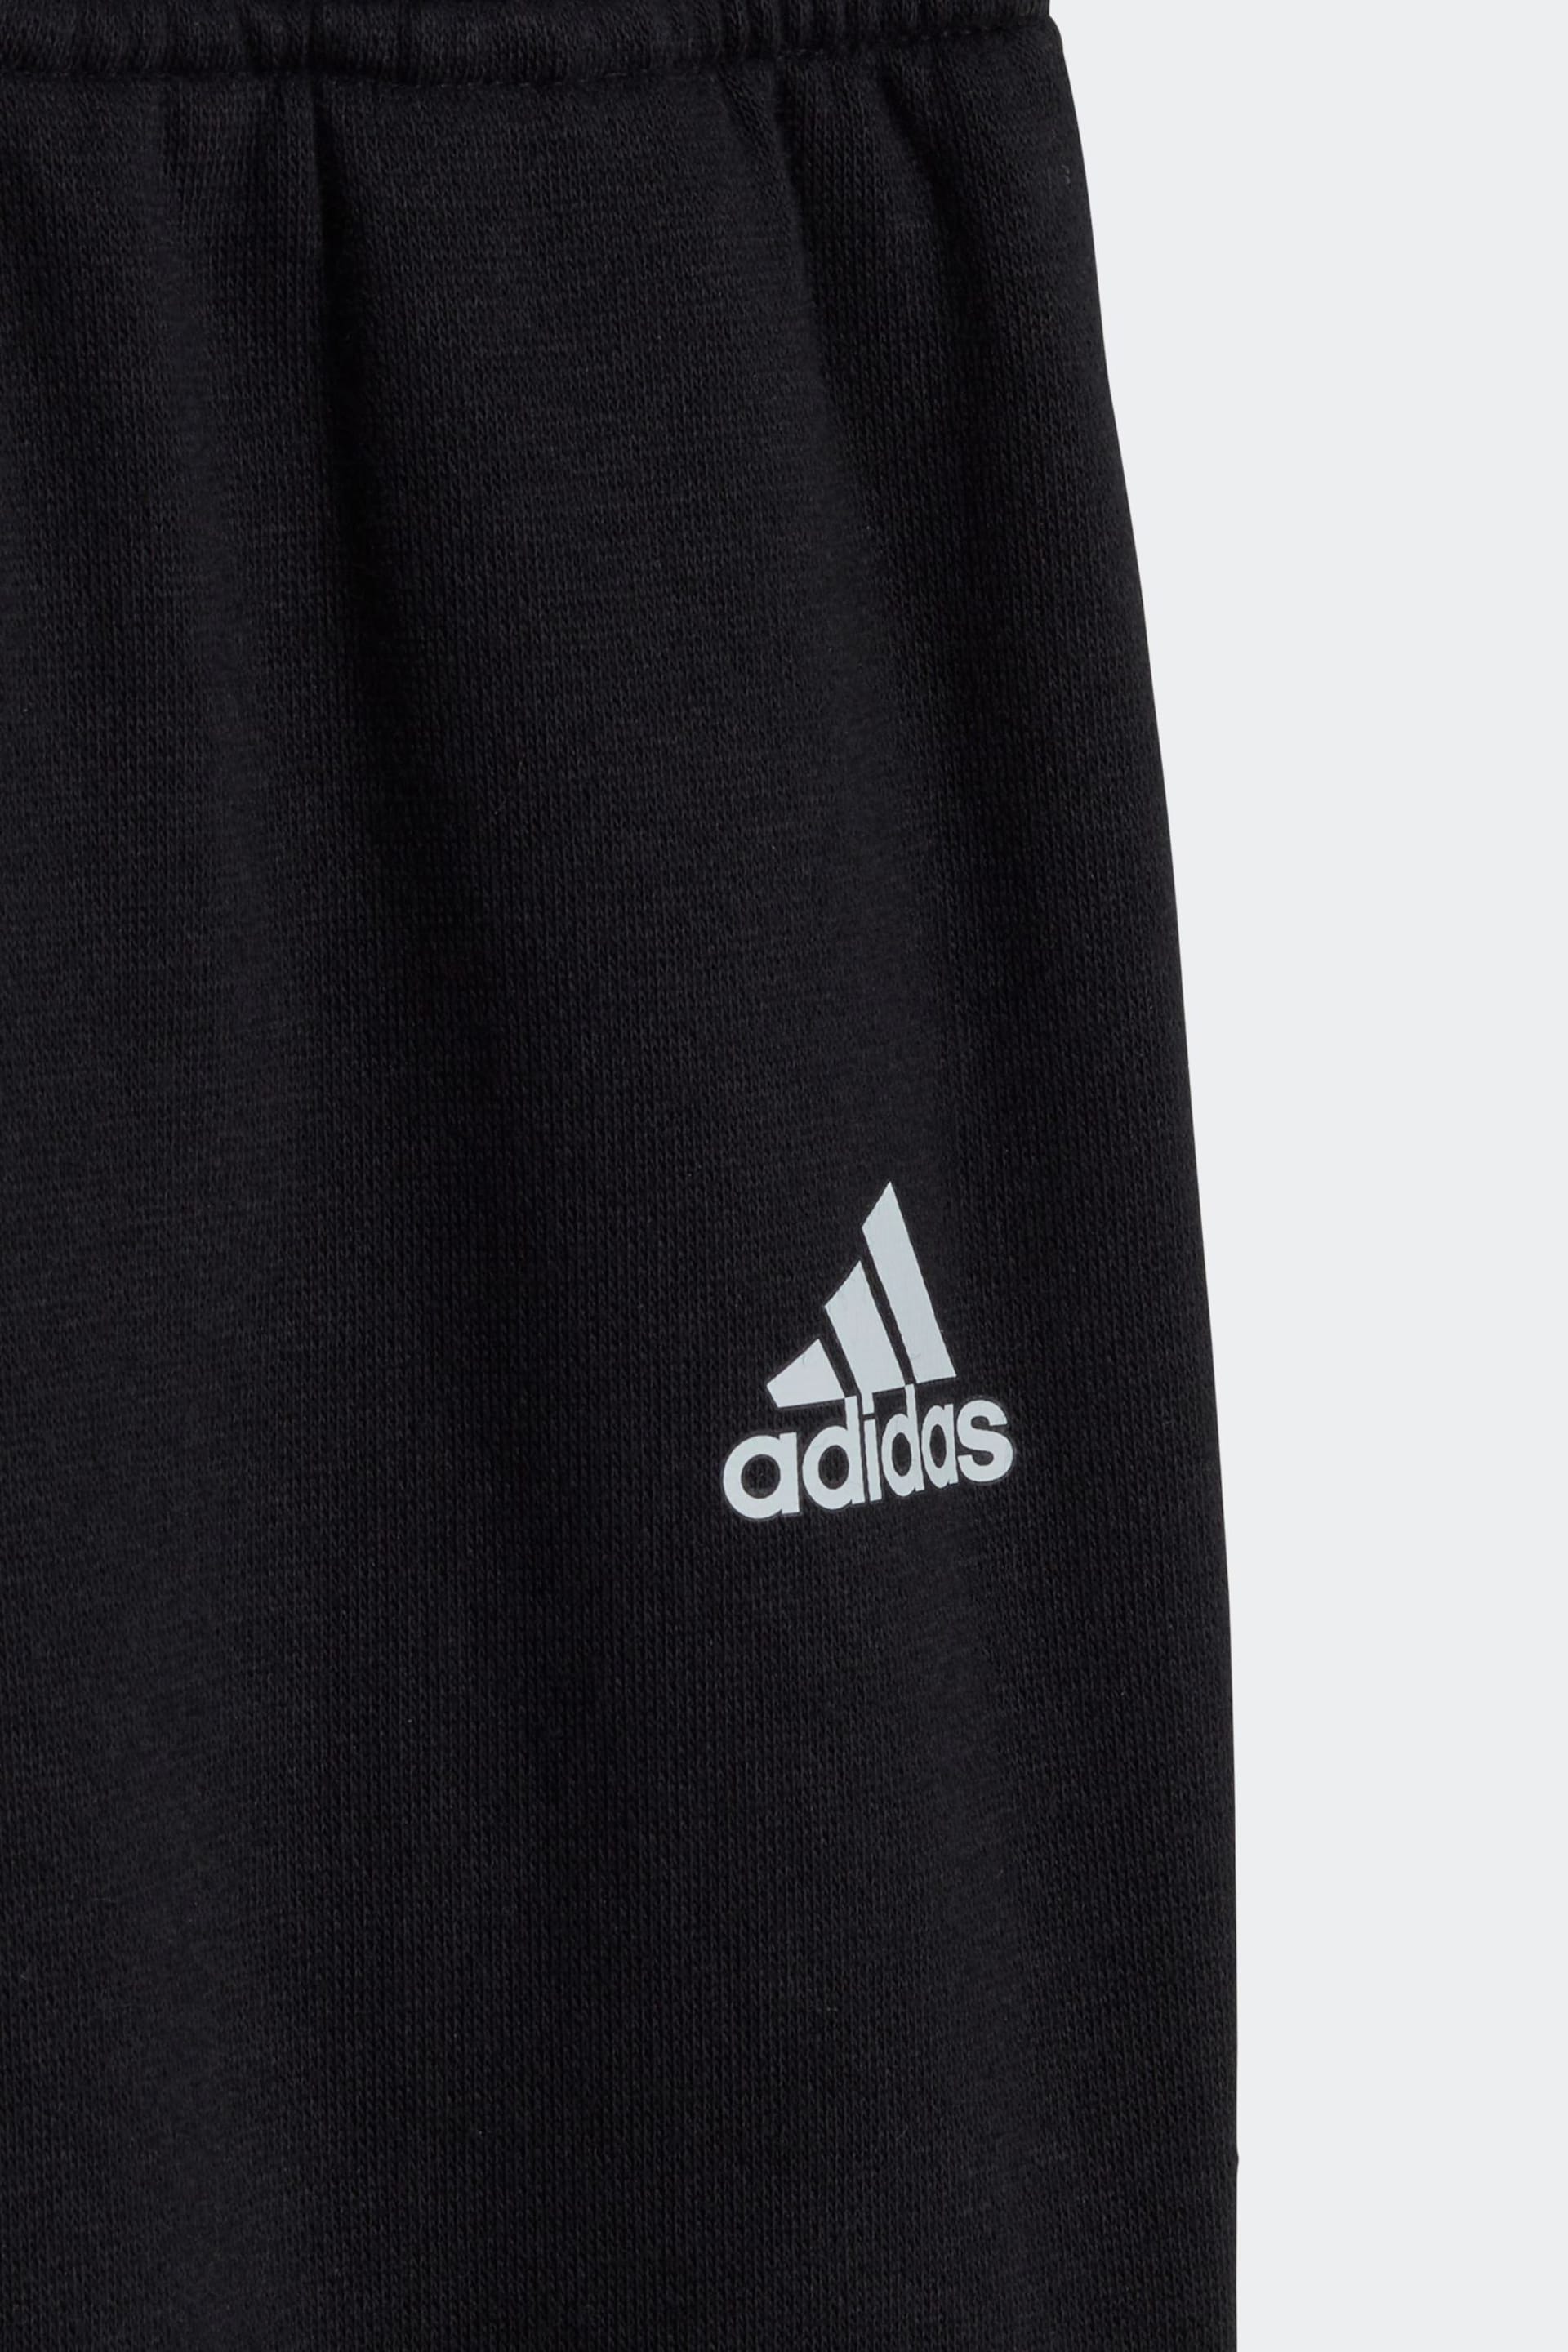 adidas Grey Infant Sportswear Essentials Lineage Joggers Set - Image 4 of 4